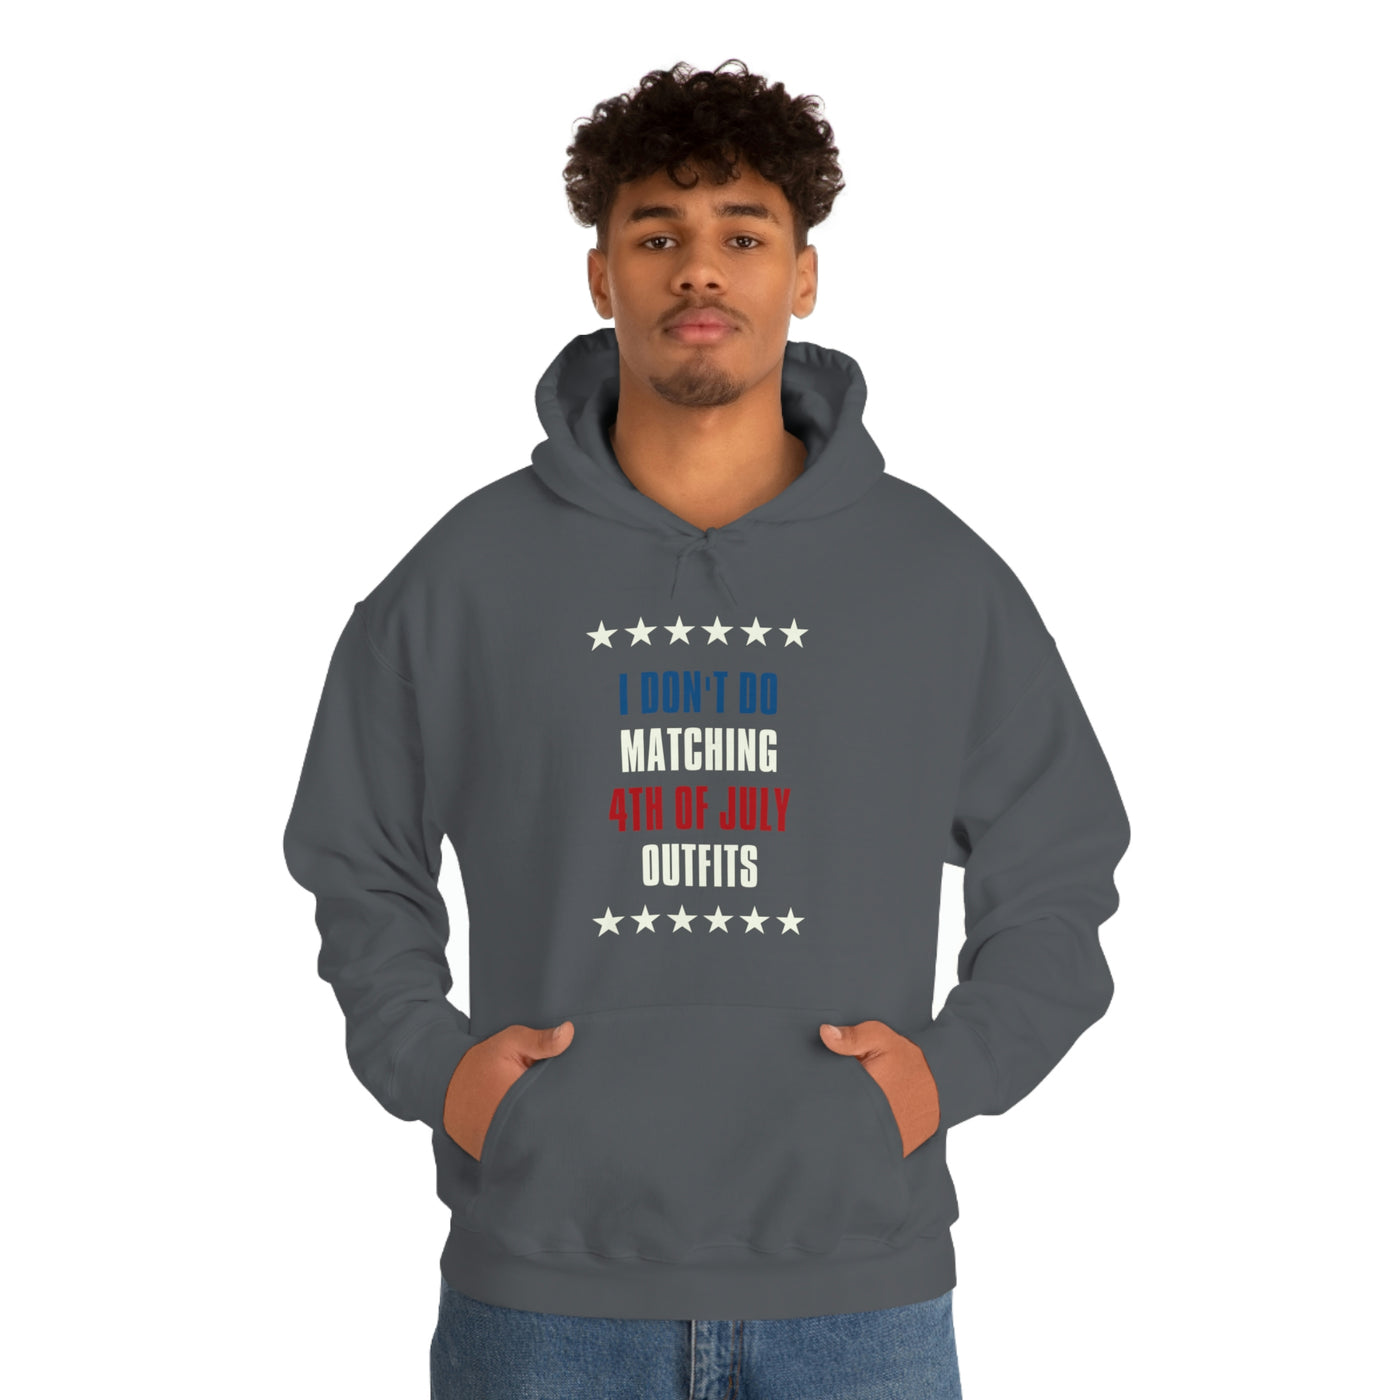 I Don't Do Matching 4th Of July Outfits Unisex Hoodie